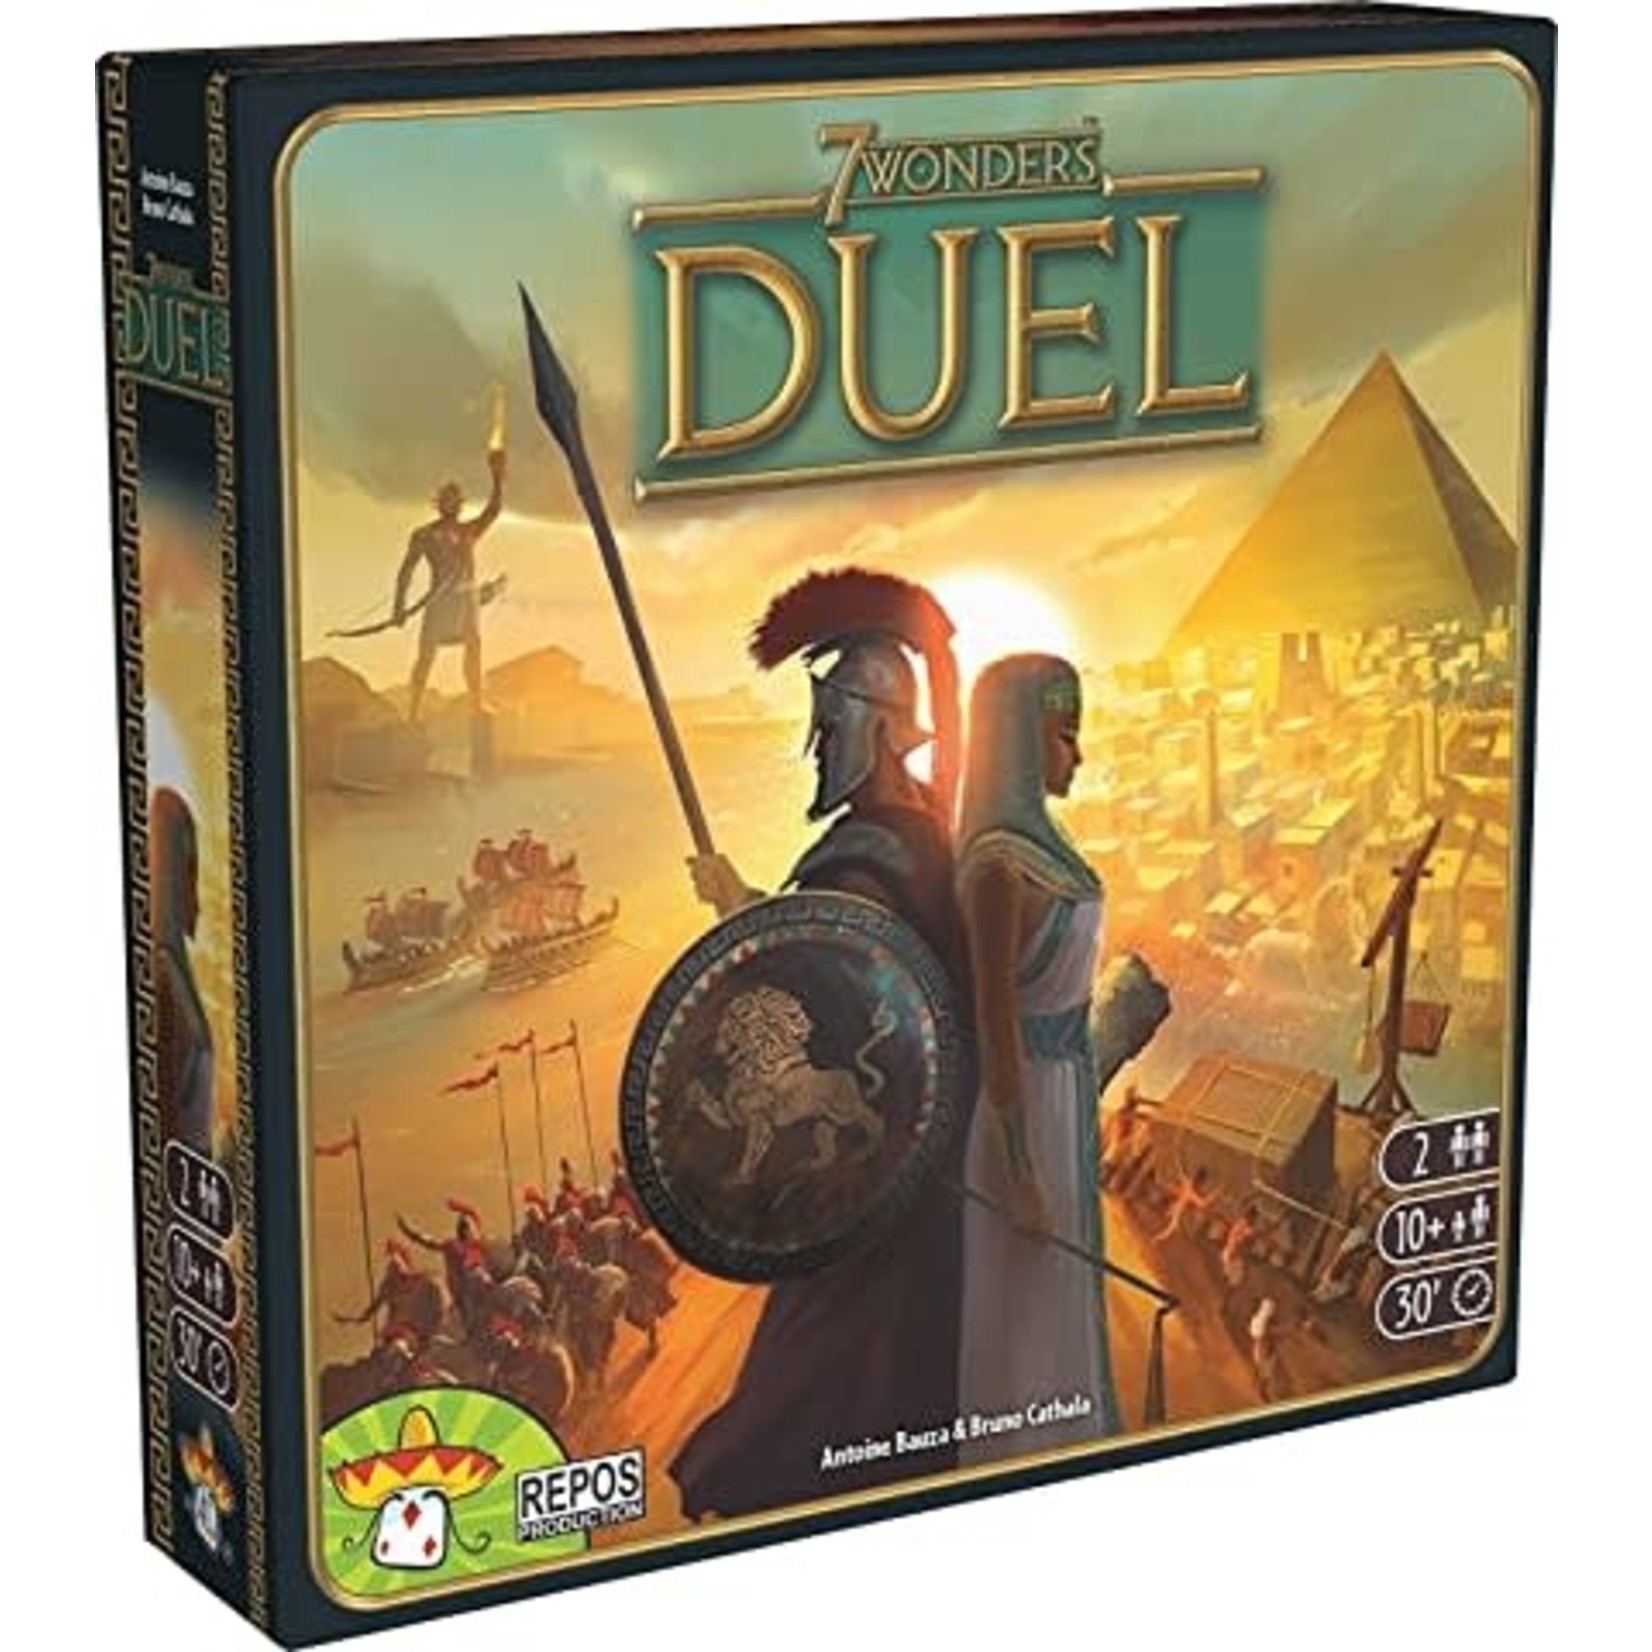 7 Wonders Duel 2nd Edition